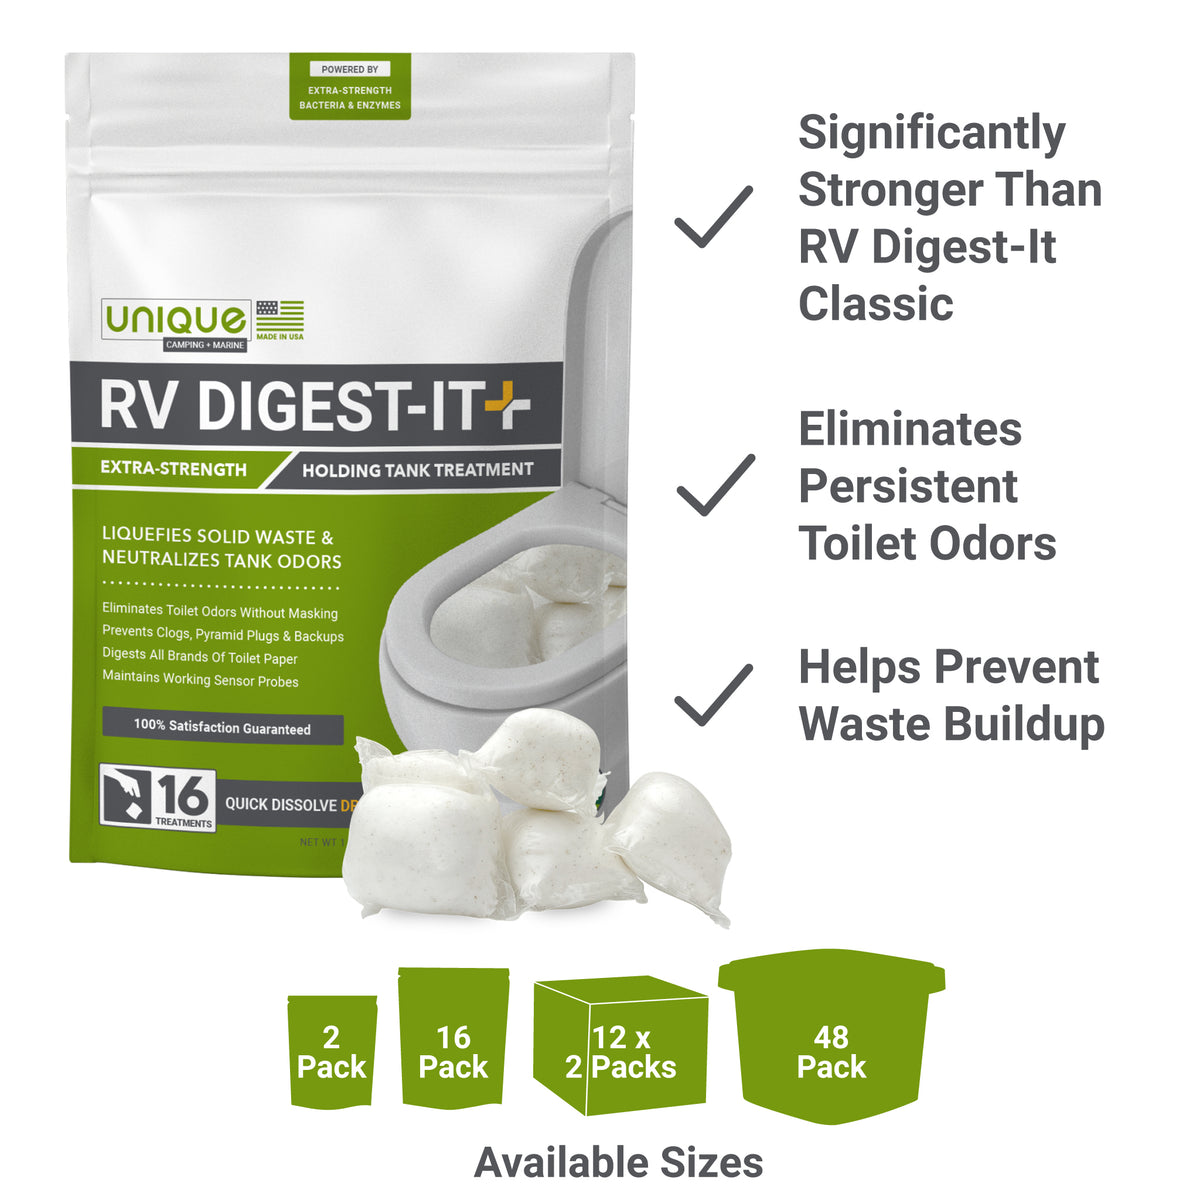 RV Digest-It Plus 16 Treatment Drop-In Pods Features